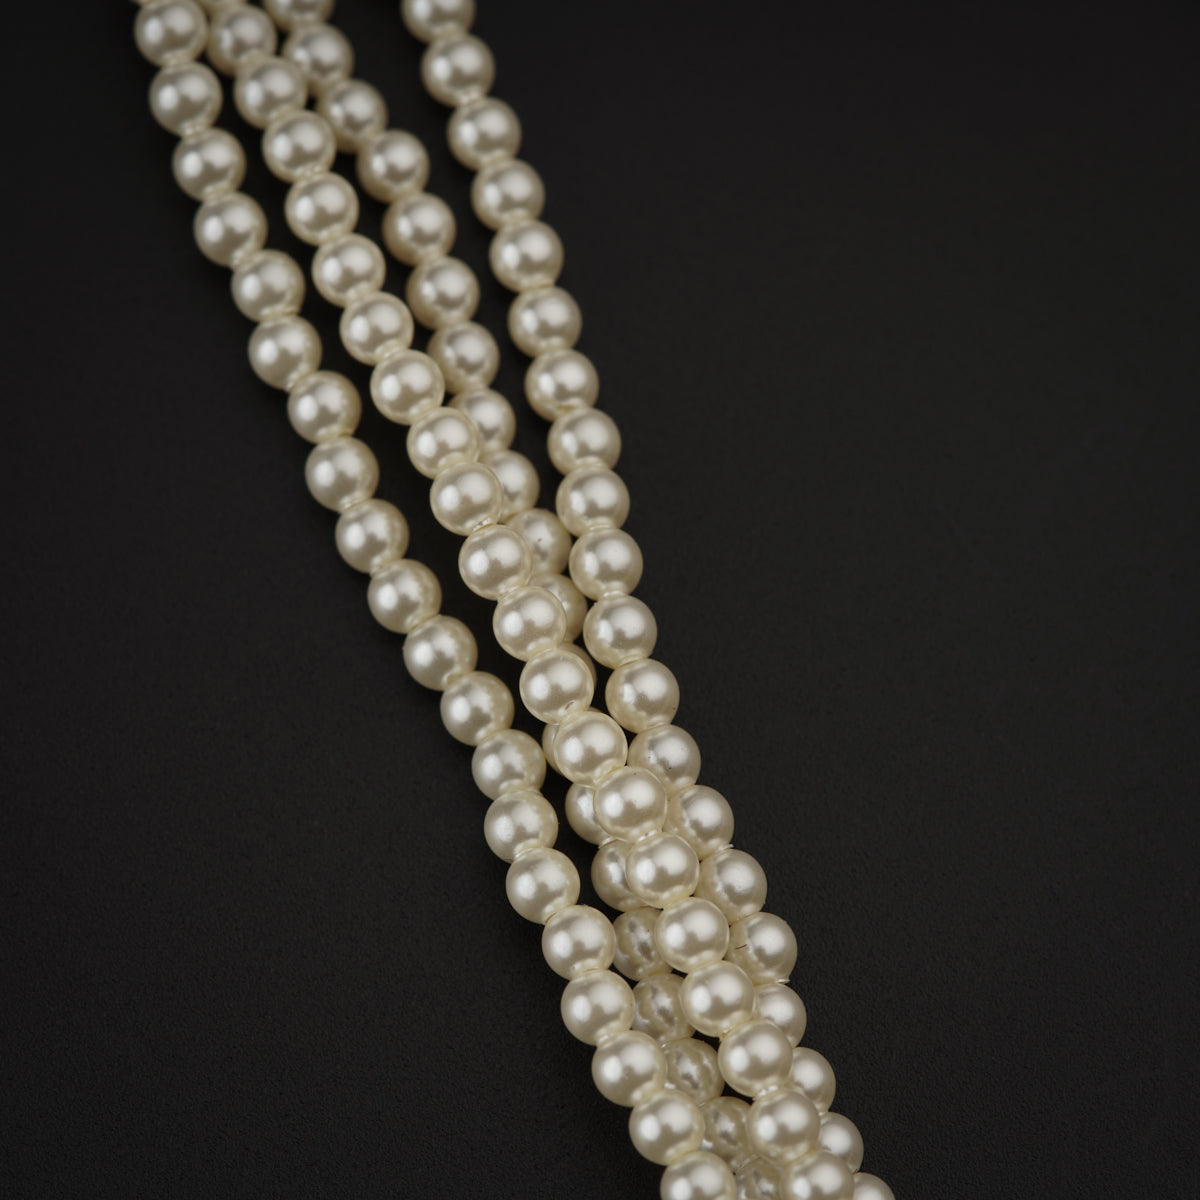 Silver Beads Motif Necklace with Pearls Gold Plated